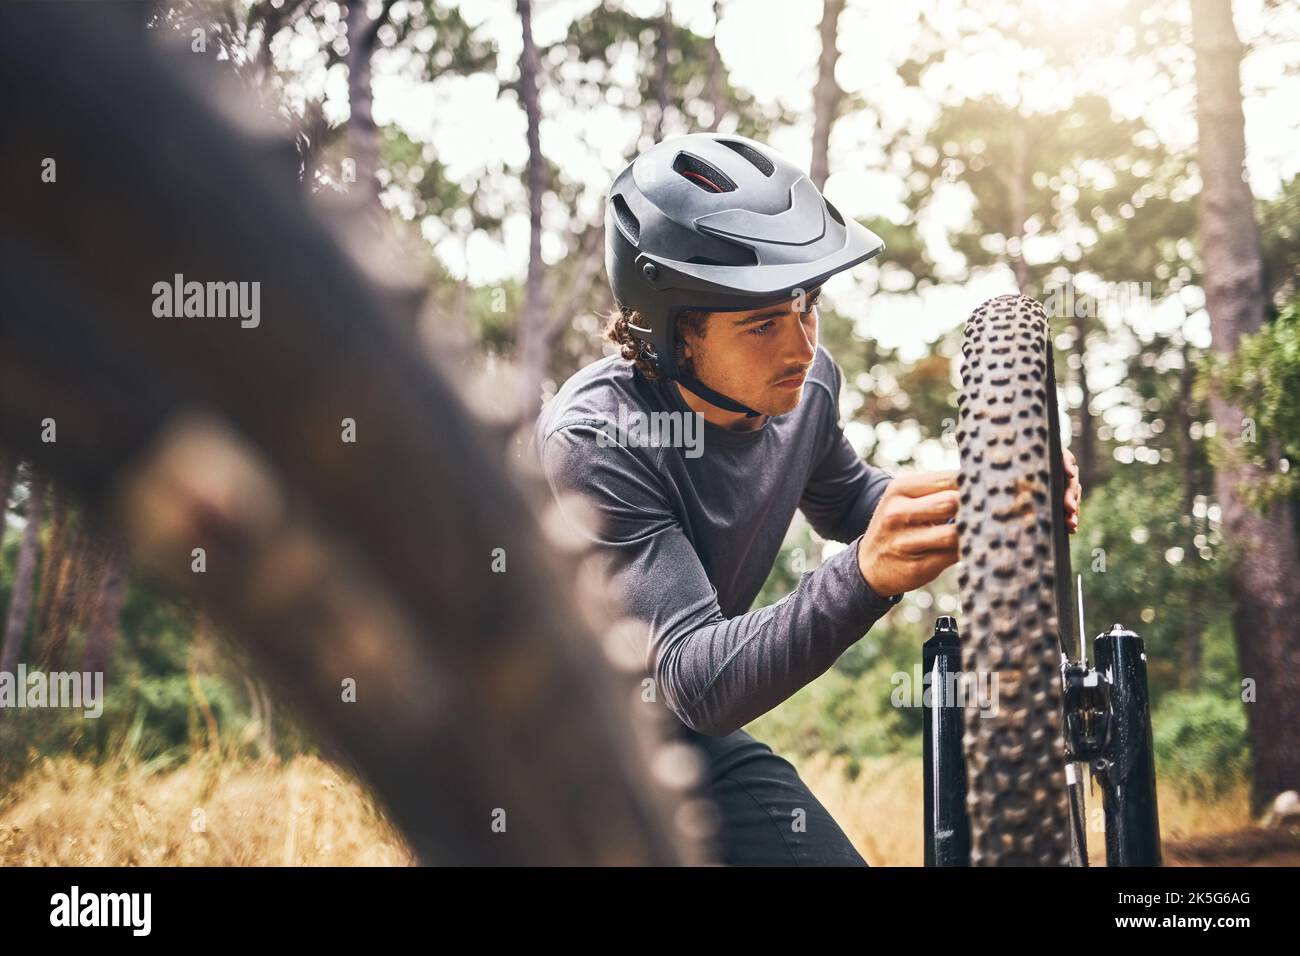 Cycling, adventure trail and bike repair, man fix wheel in forest. Nature, mountain biking and cyclist, outdoor cycle maintenance in Australia Stock Photo